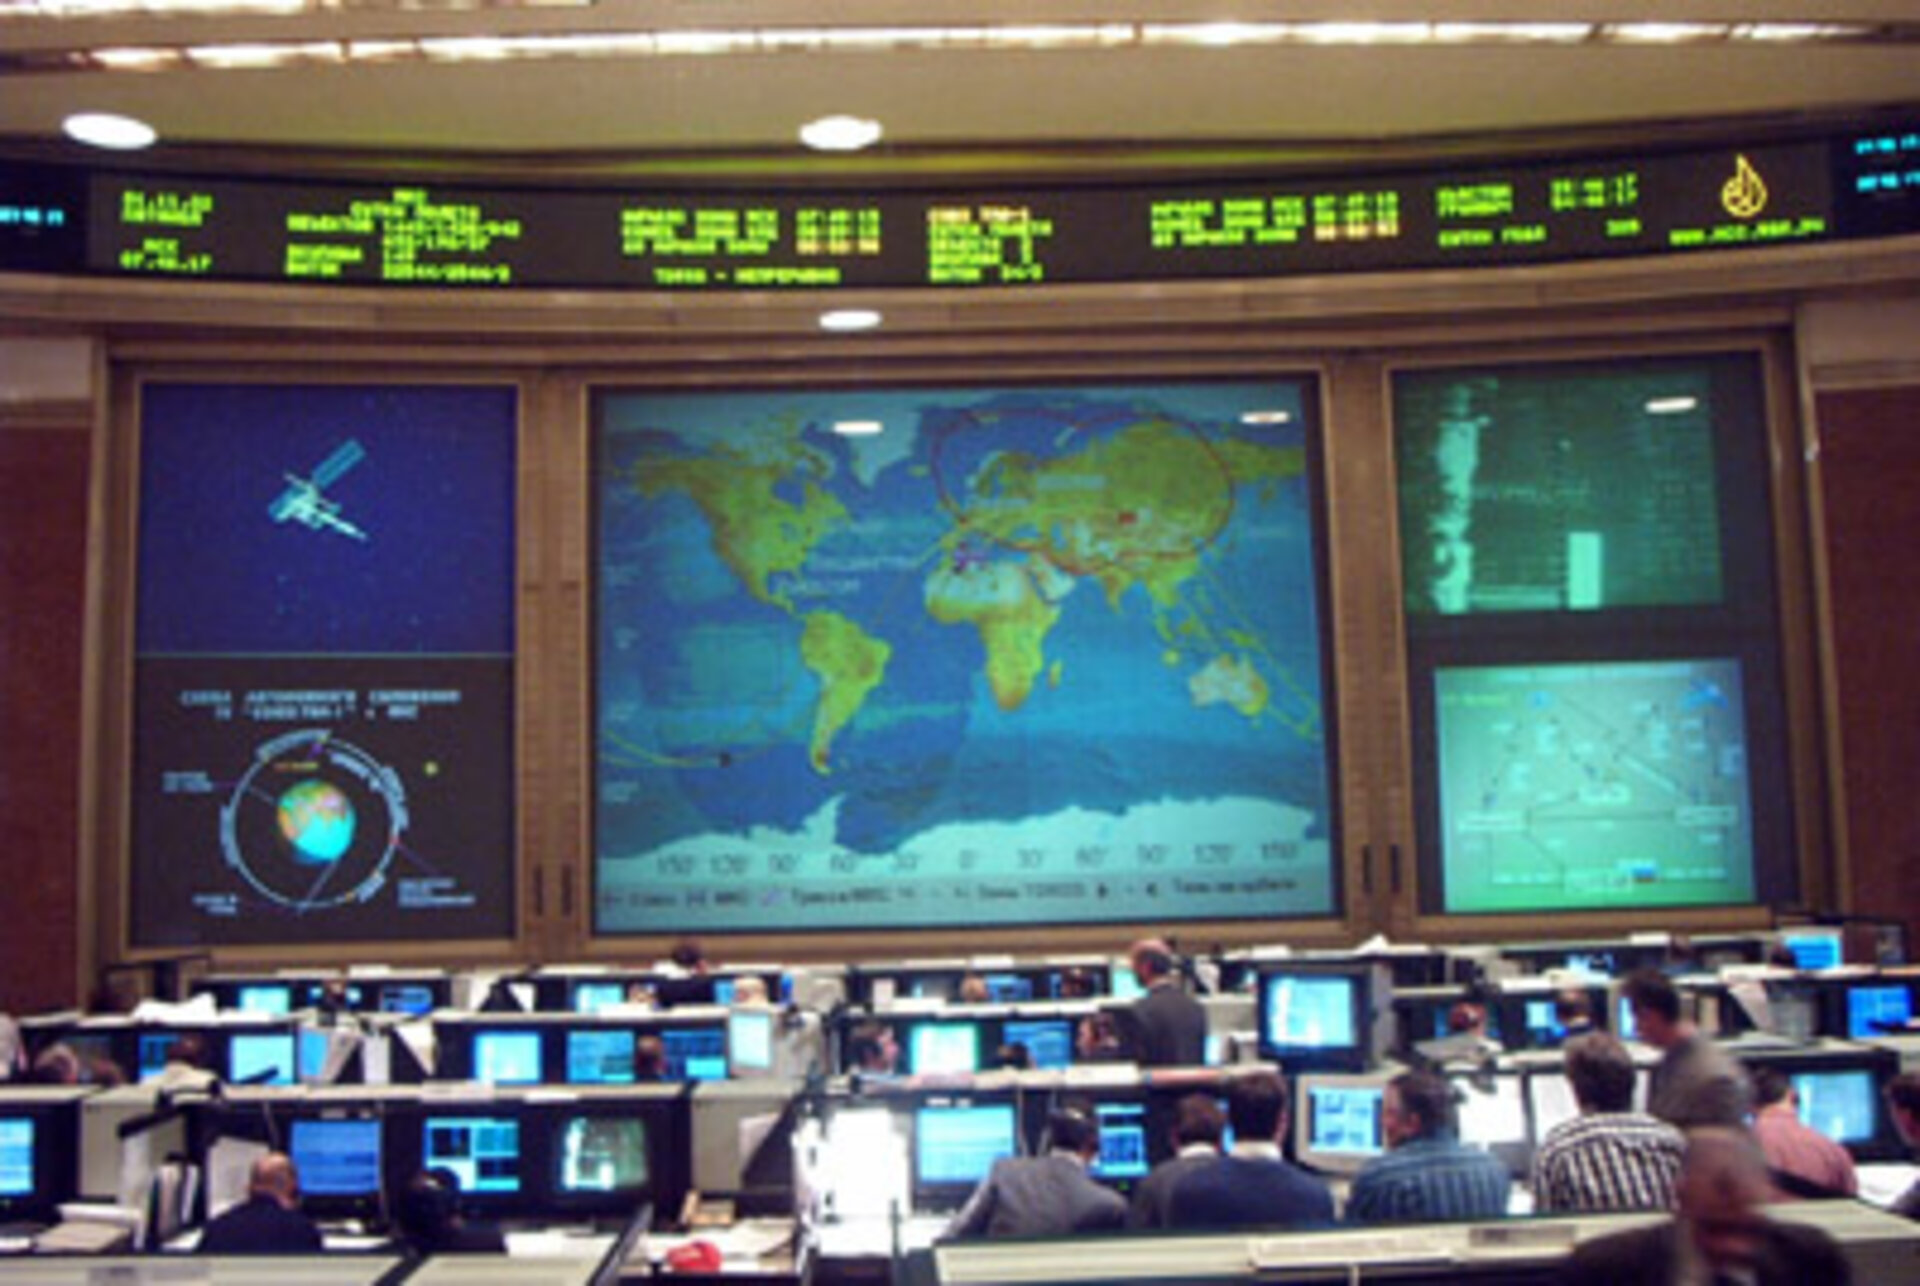 November 1 - Awaiting the docking in the TSUP ground control centre in Korolev, Moscow